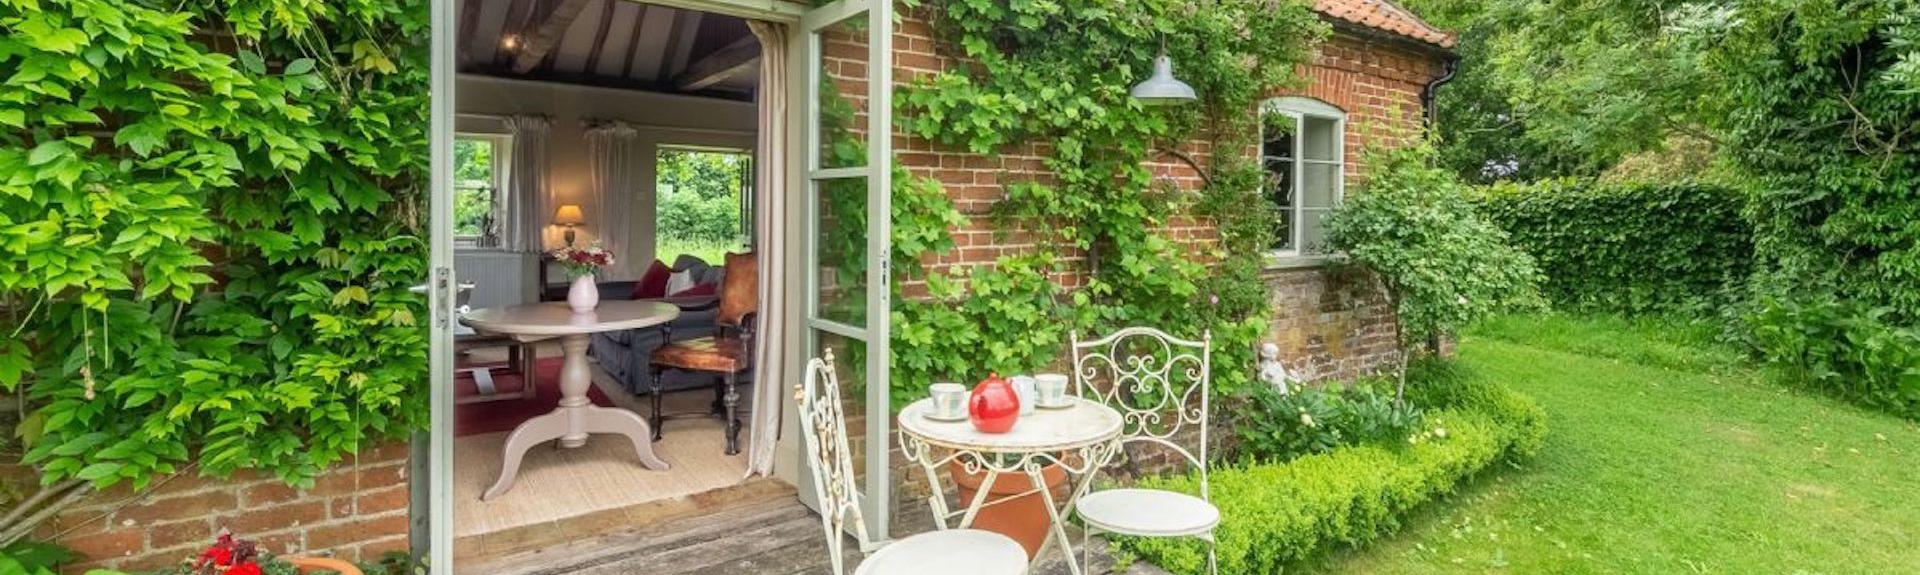 A single storey cottage with wysteria creeping around open French windows. Outside is a deck with tables and chairs overlooking a lawned garden..